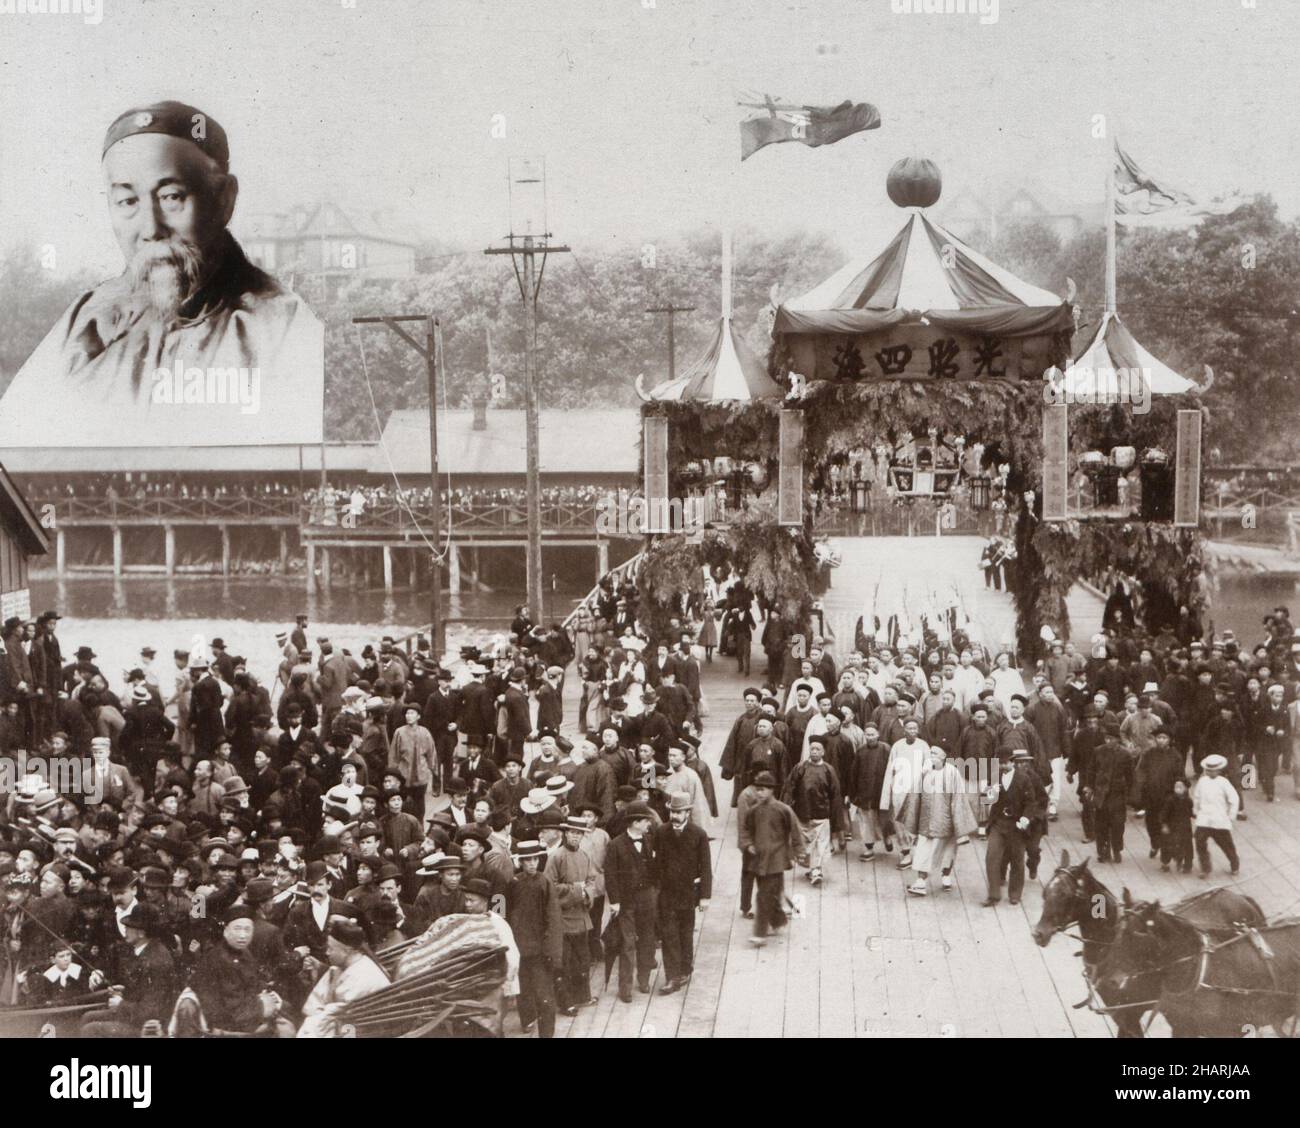 Arrival of Li Hung Chang, Chinese Viceroy, at Vancouver B.C., with photo of Viceroy in corner. View of the arrival of Li Hung Chang, showing party processing from wharf through a triumphal arch erected at the quayside. A head-and-shoulders portrait of the Viceroy is printed in the top left corner of the photograph - 1896 Stock Photo